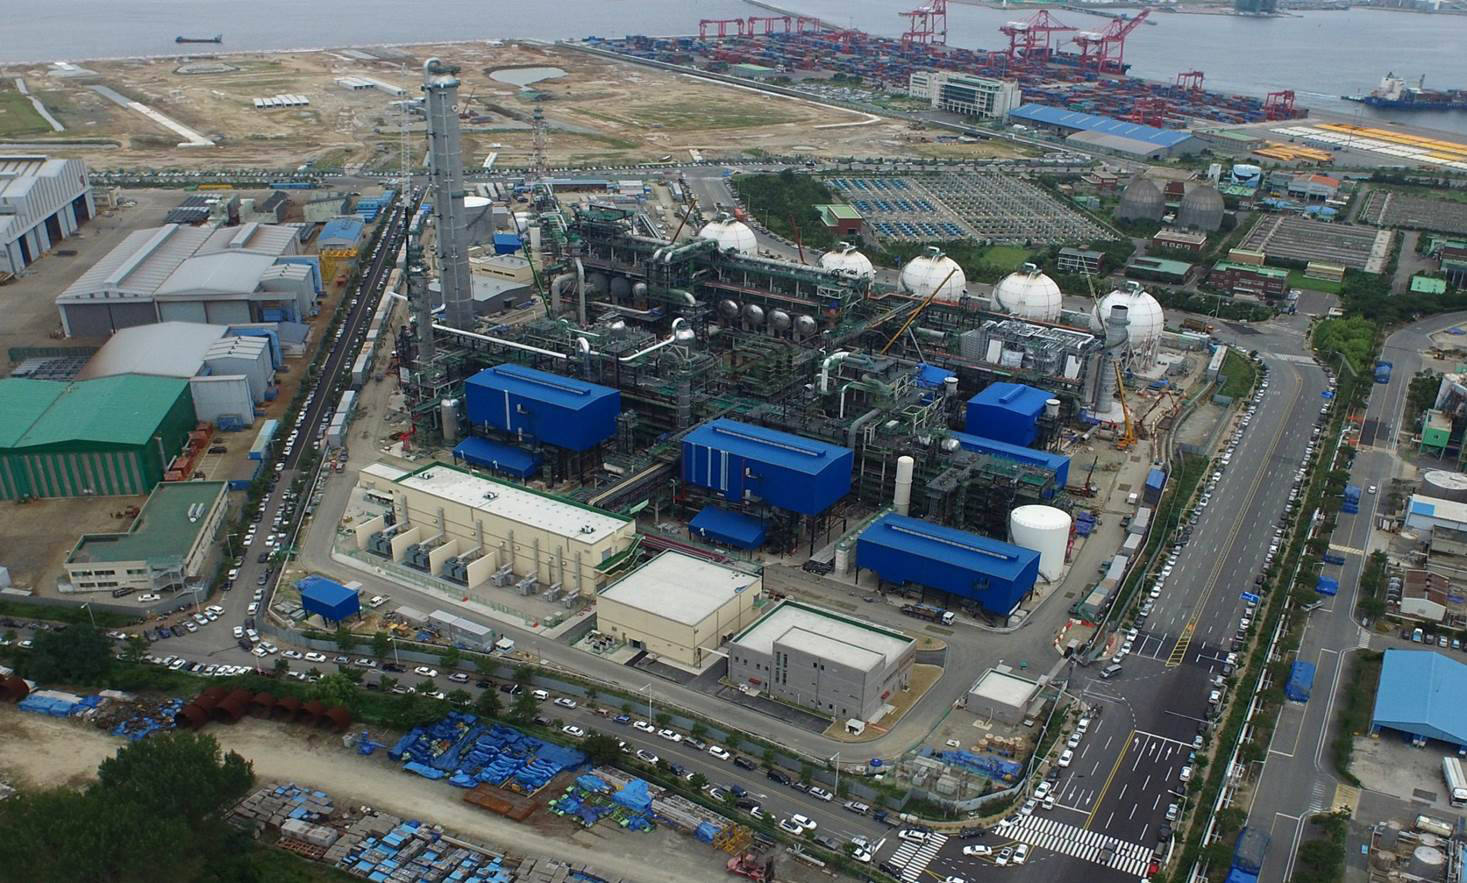 Propane dehydrogenation unit of SK and Advanced in Ulsan: the largest in South Korea. (Photo: Clar...